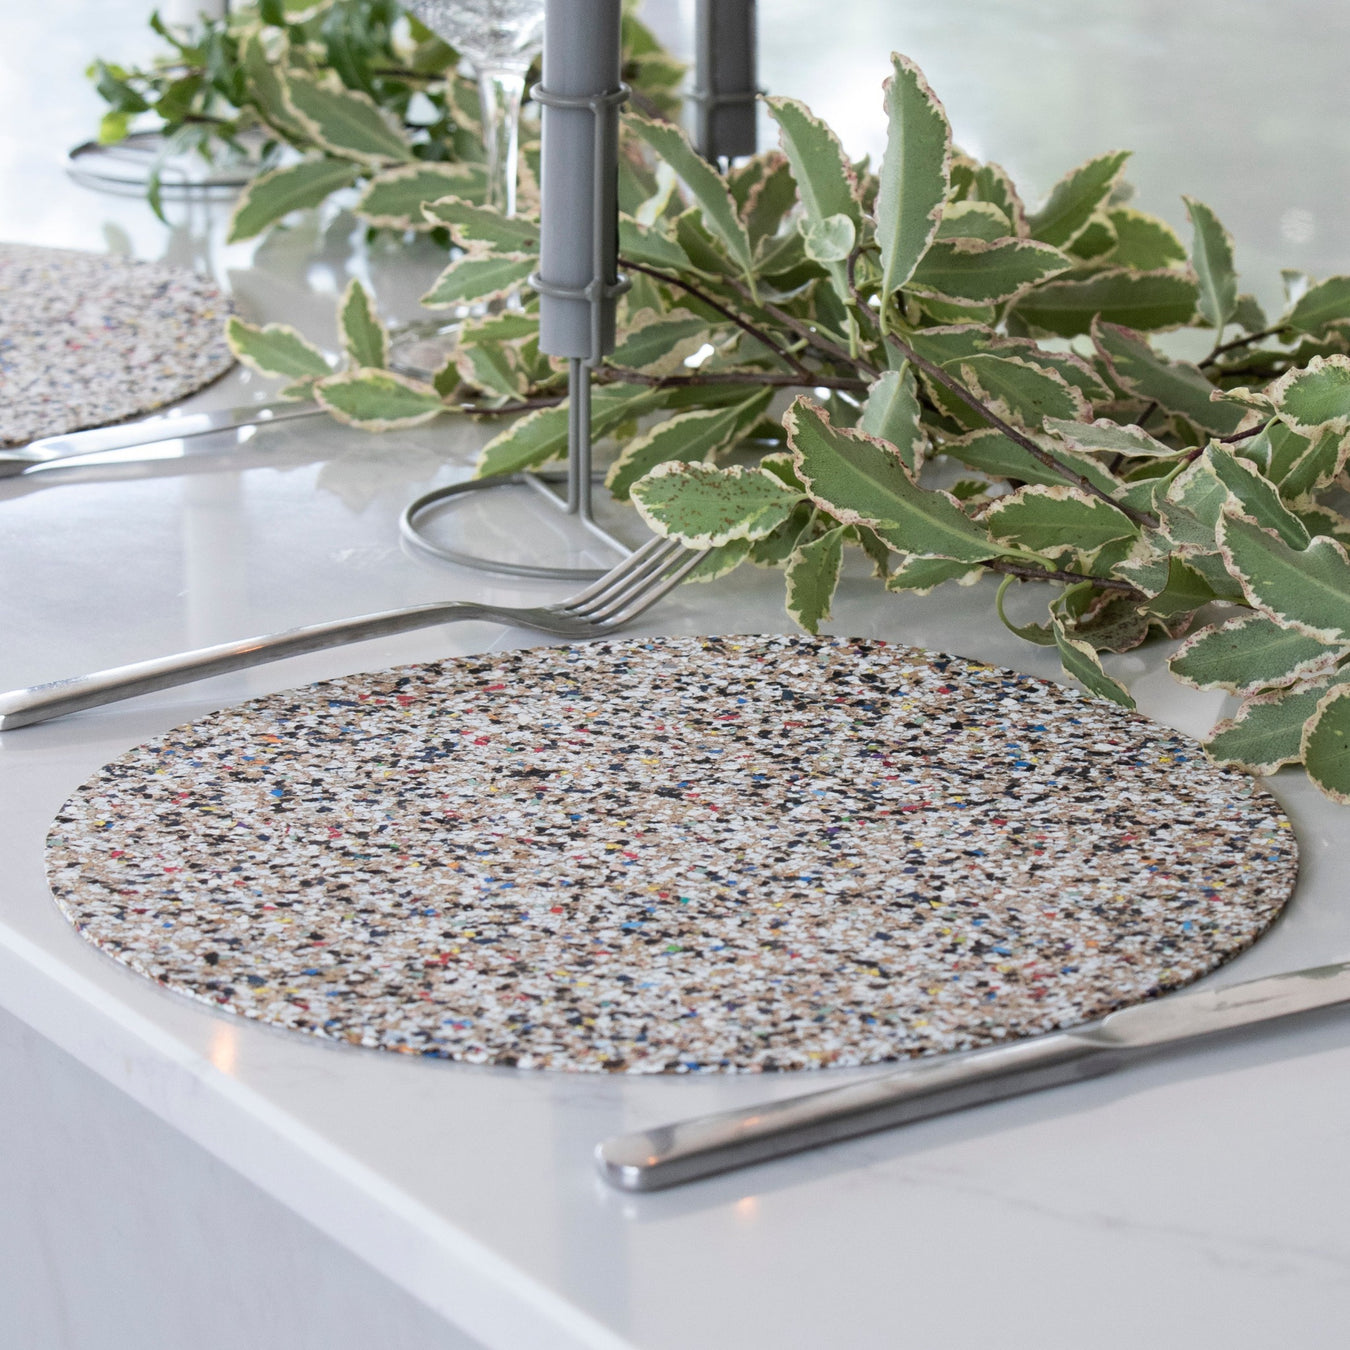 Tablemats made from beach waste are placed on a table with cuttlery and greenery around it 